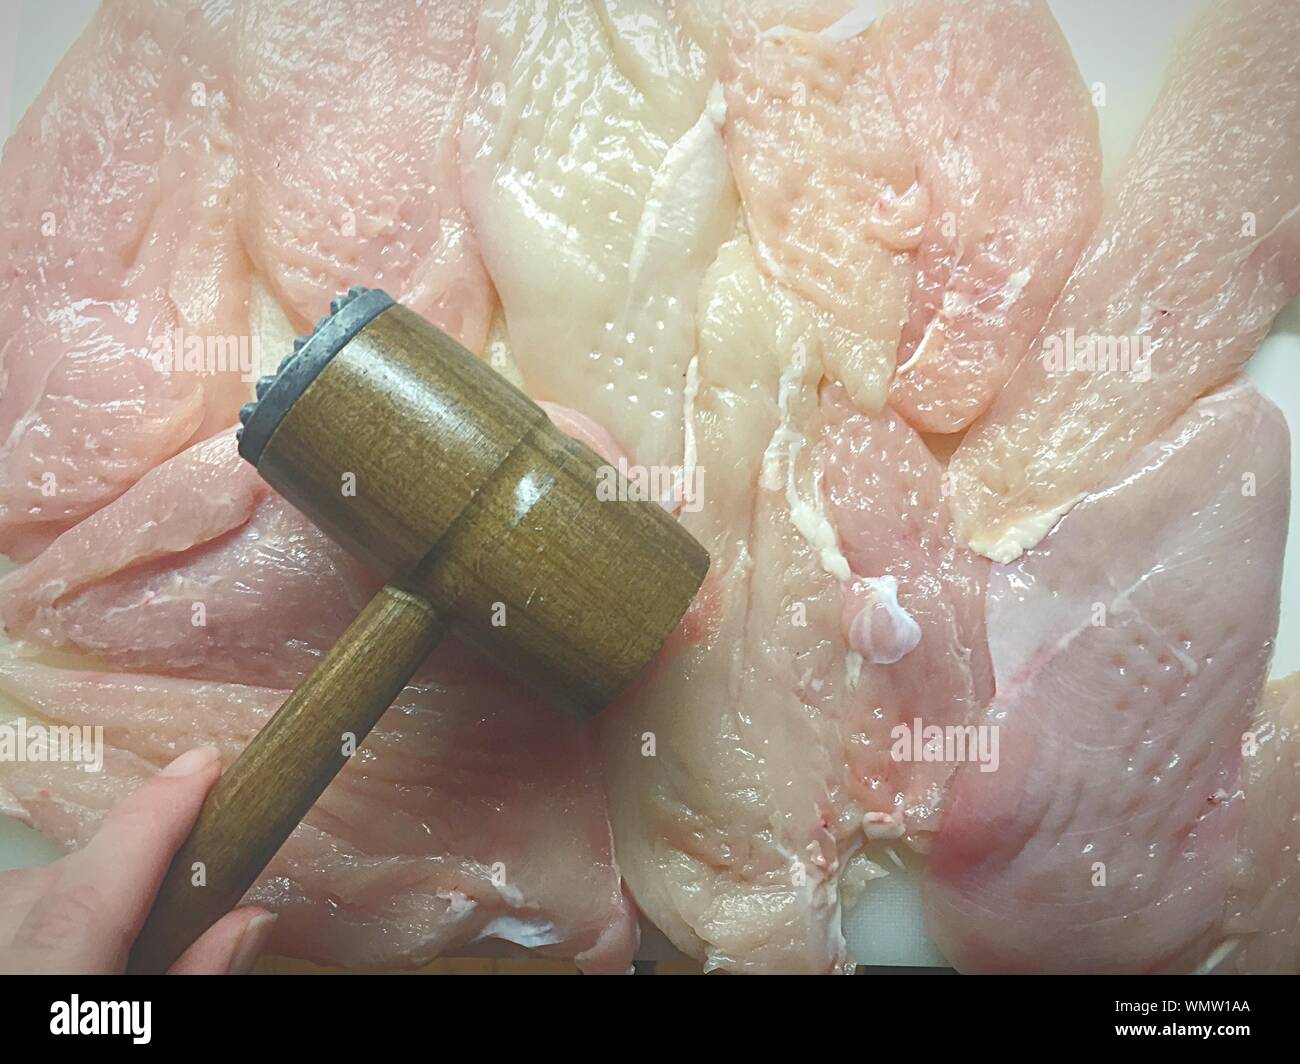 Cropped Hand Holding Tenderizer On Raw Chicken Meat Stock Photo